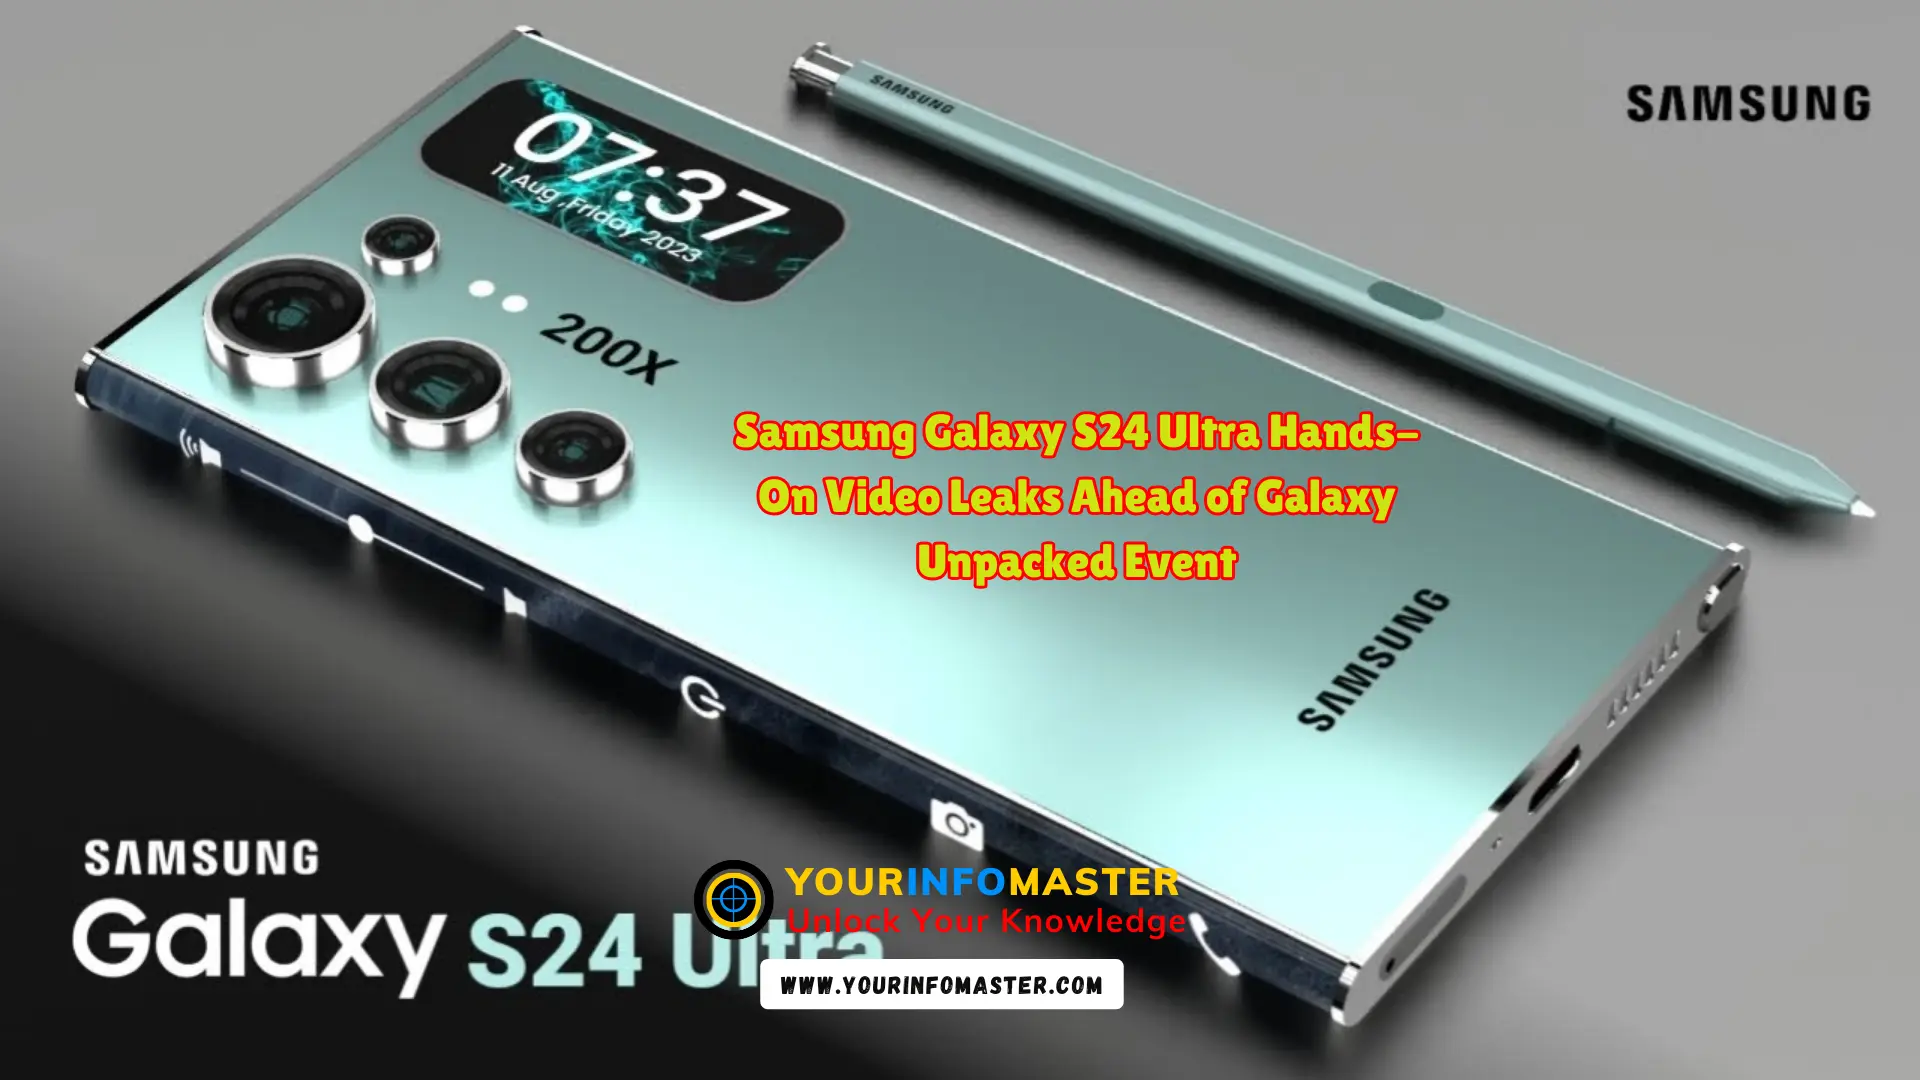 Samsung Galaxy S24 Ultra Hands-On Video Leaks Ahead of Galaxy Unpacked Event